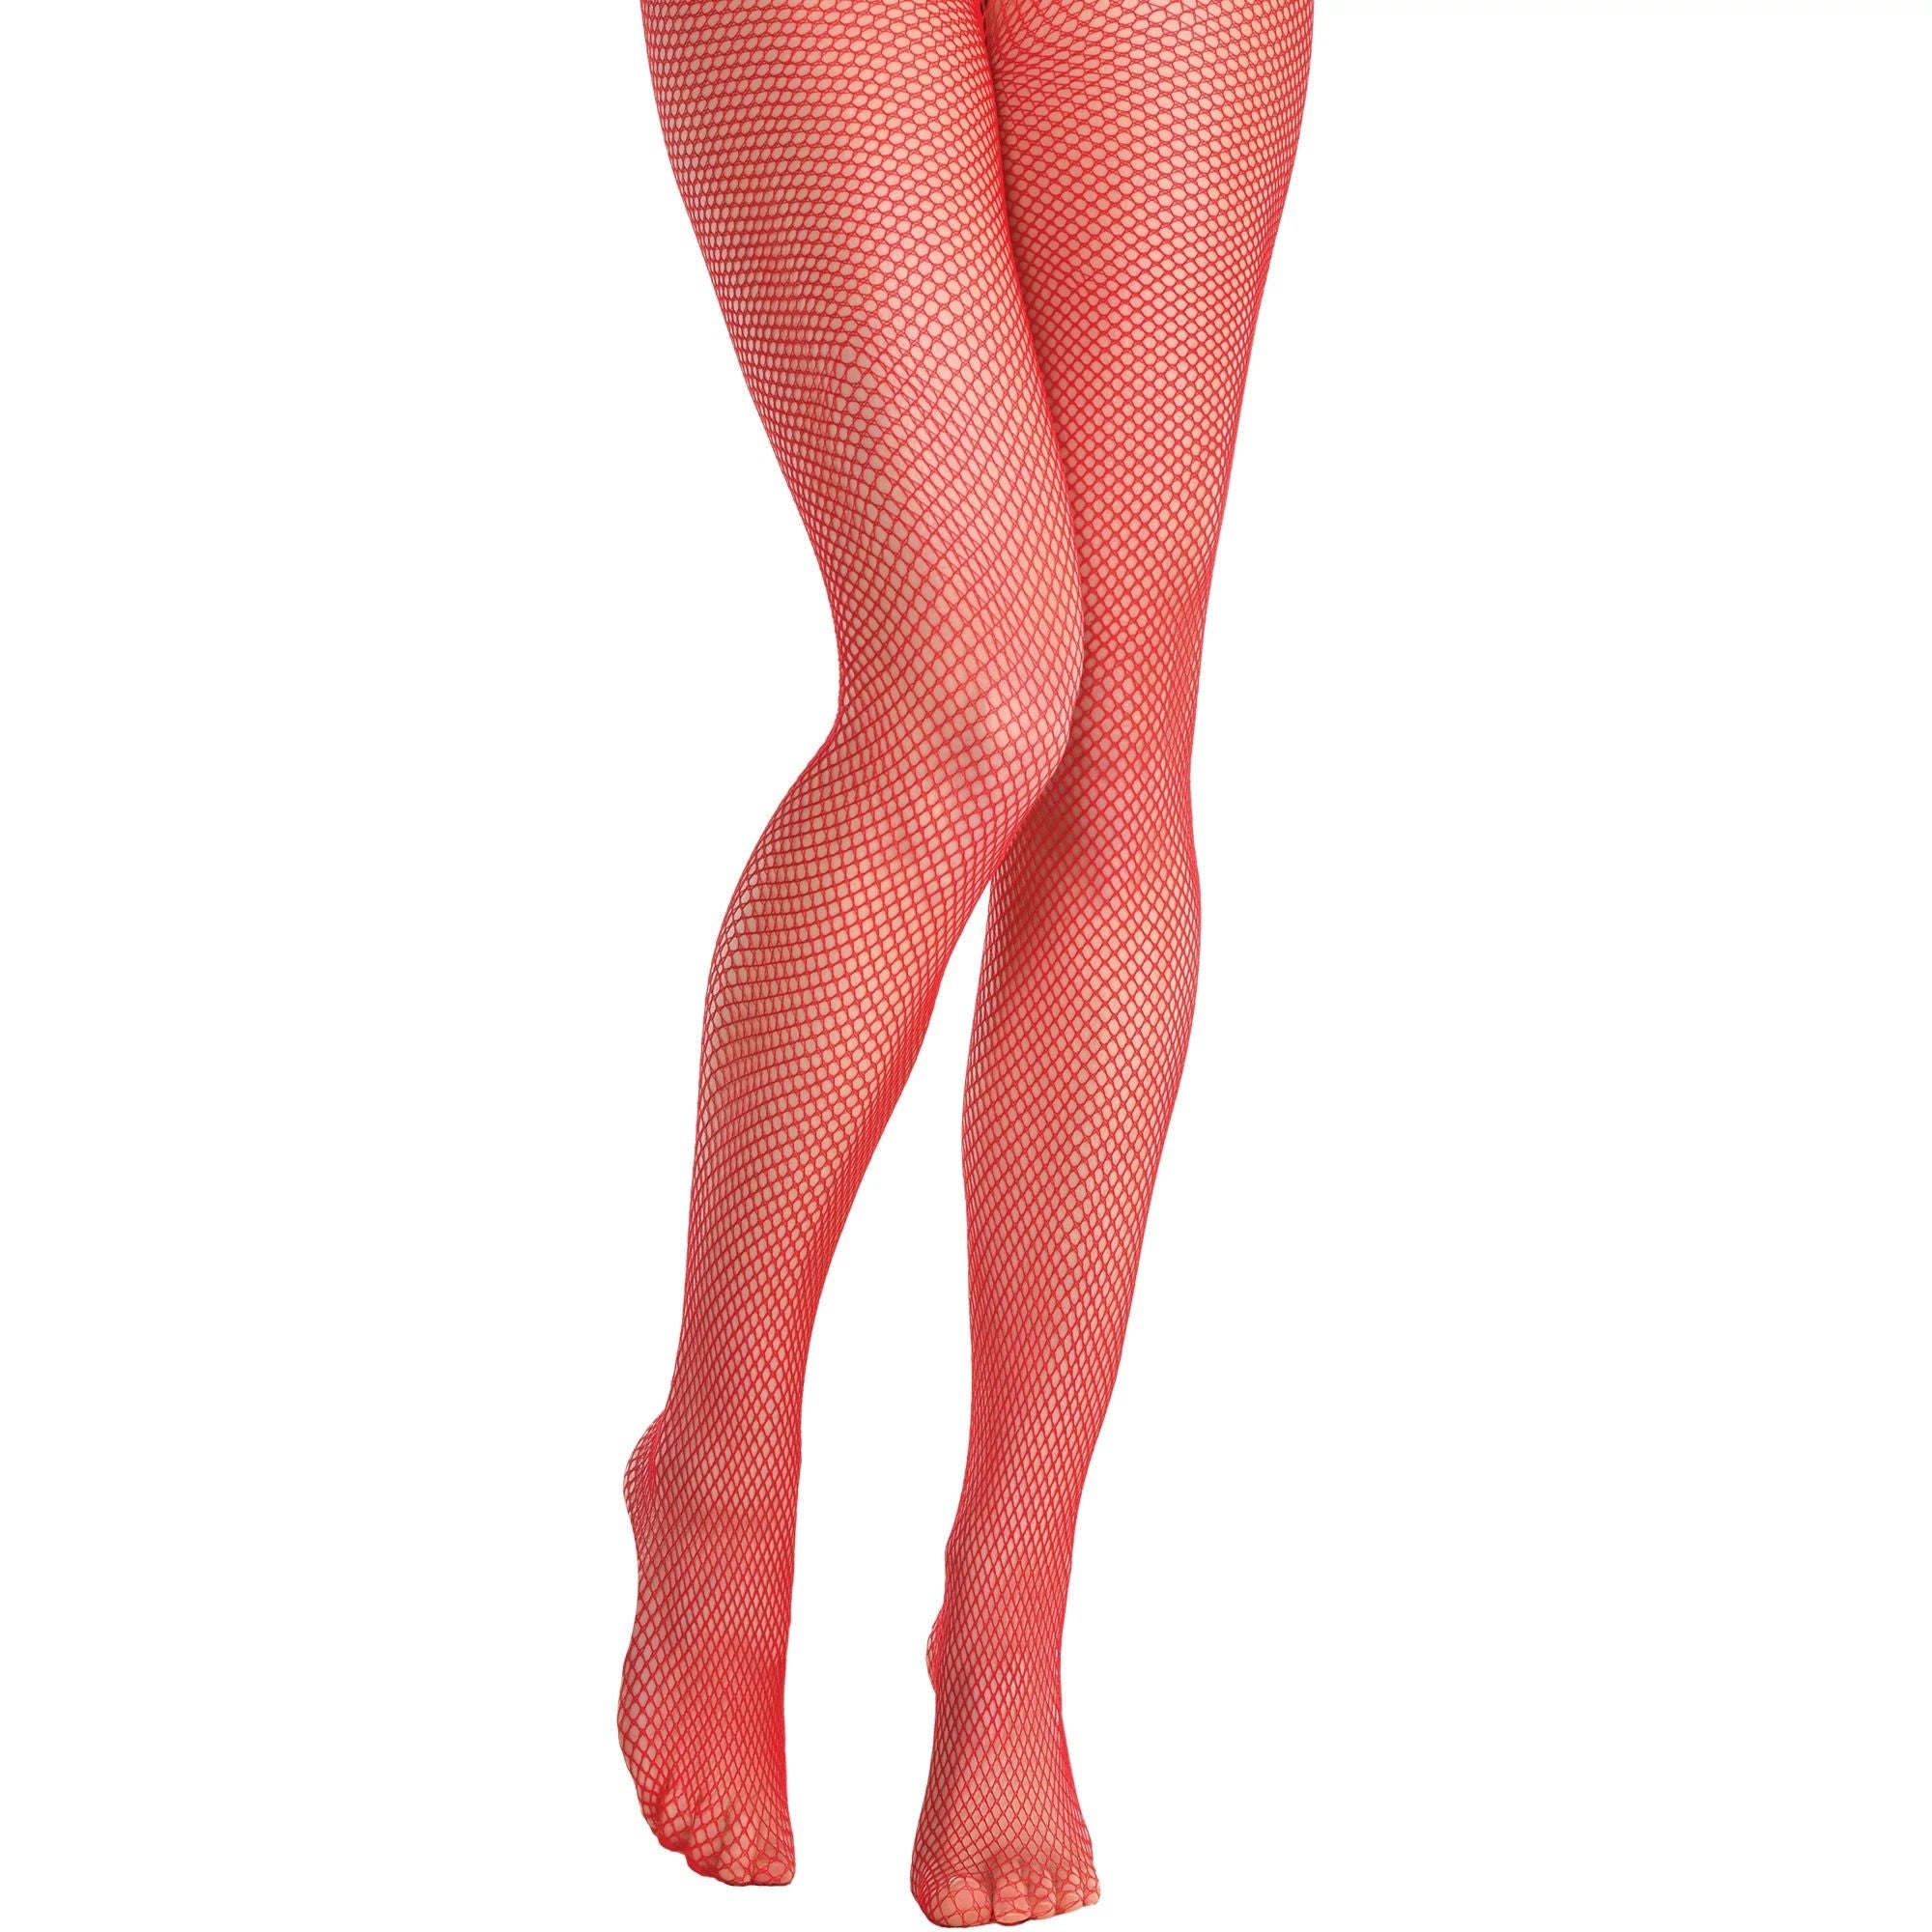 Amscan COSTUMES: ACCESSORIES Standard Red Fishnet Stockings